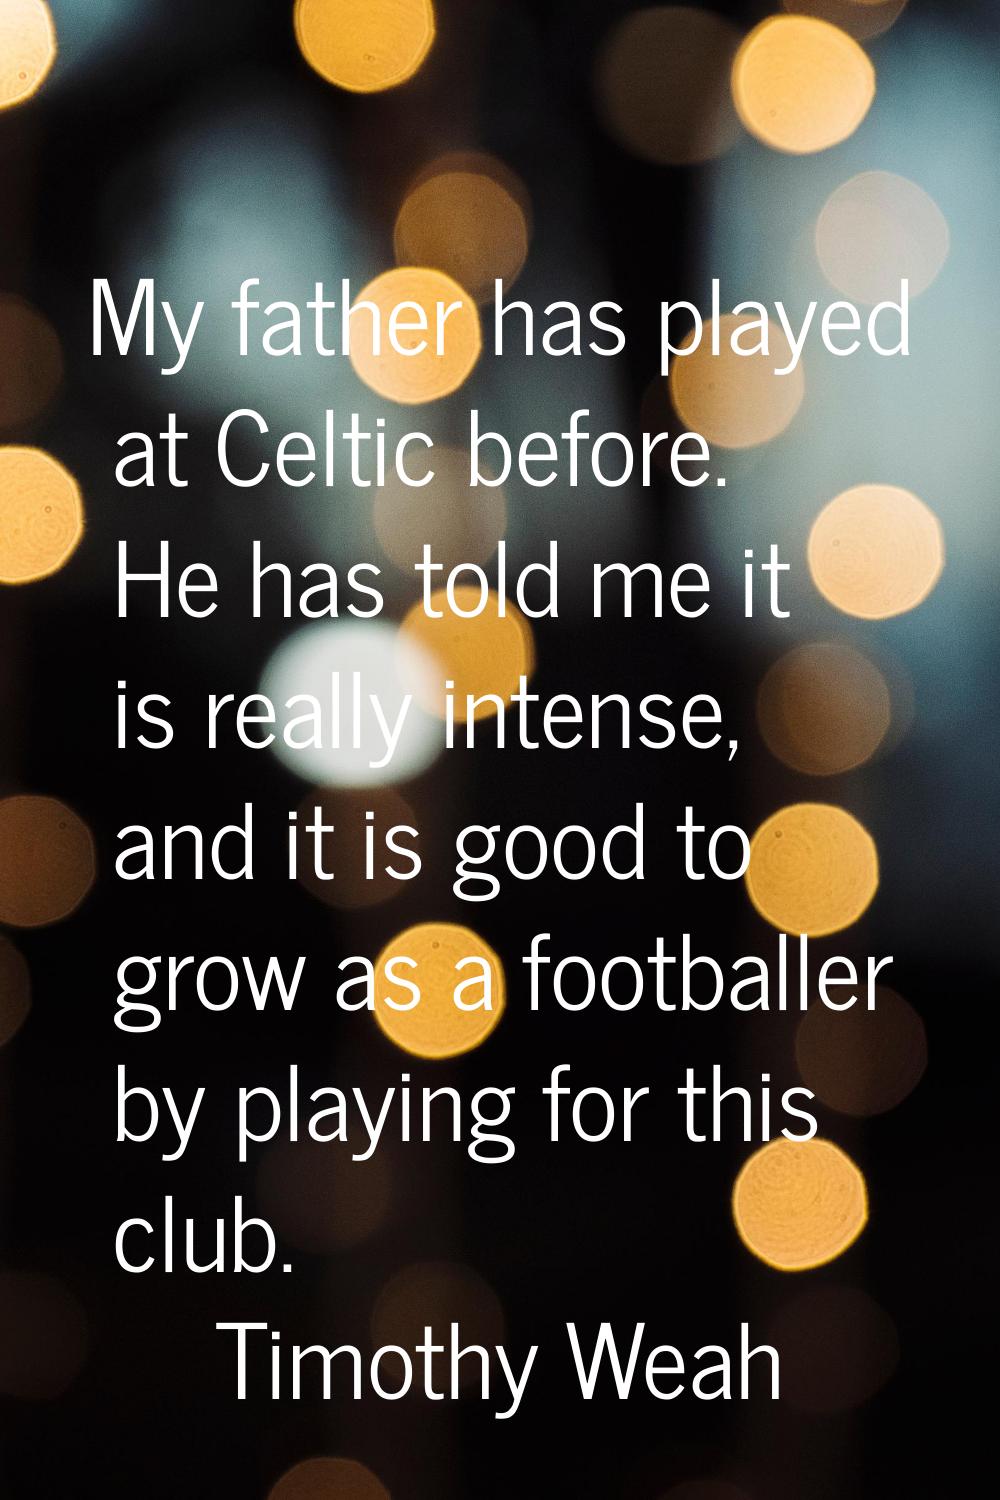 My father has played at Celtic before. He has told me it is really intense, and it is good to grow 